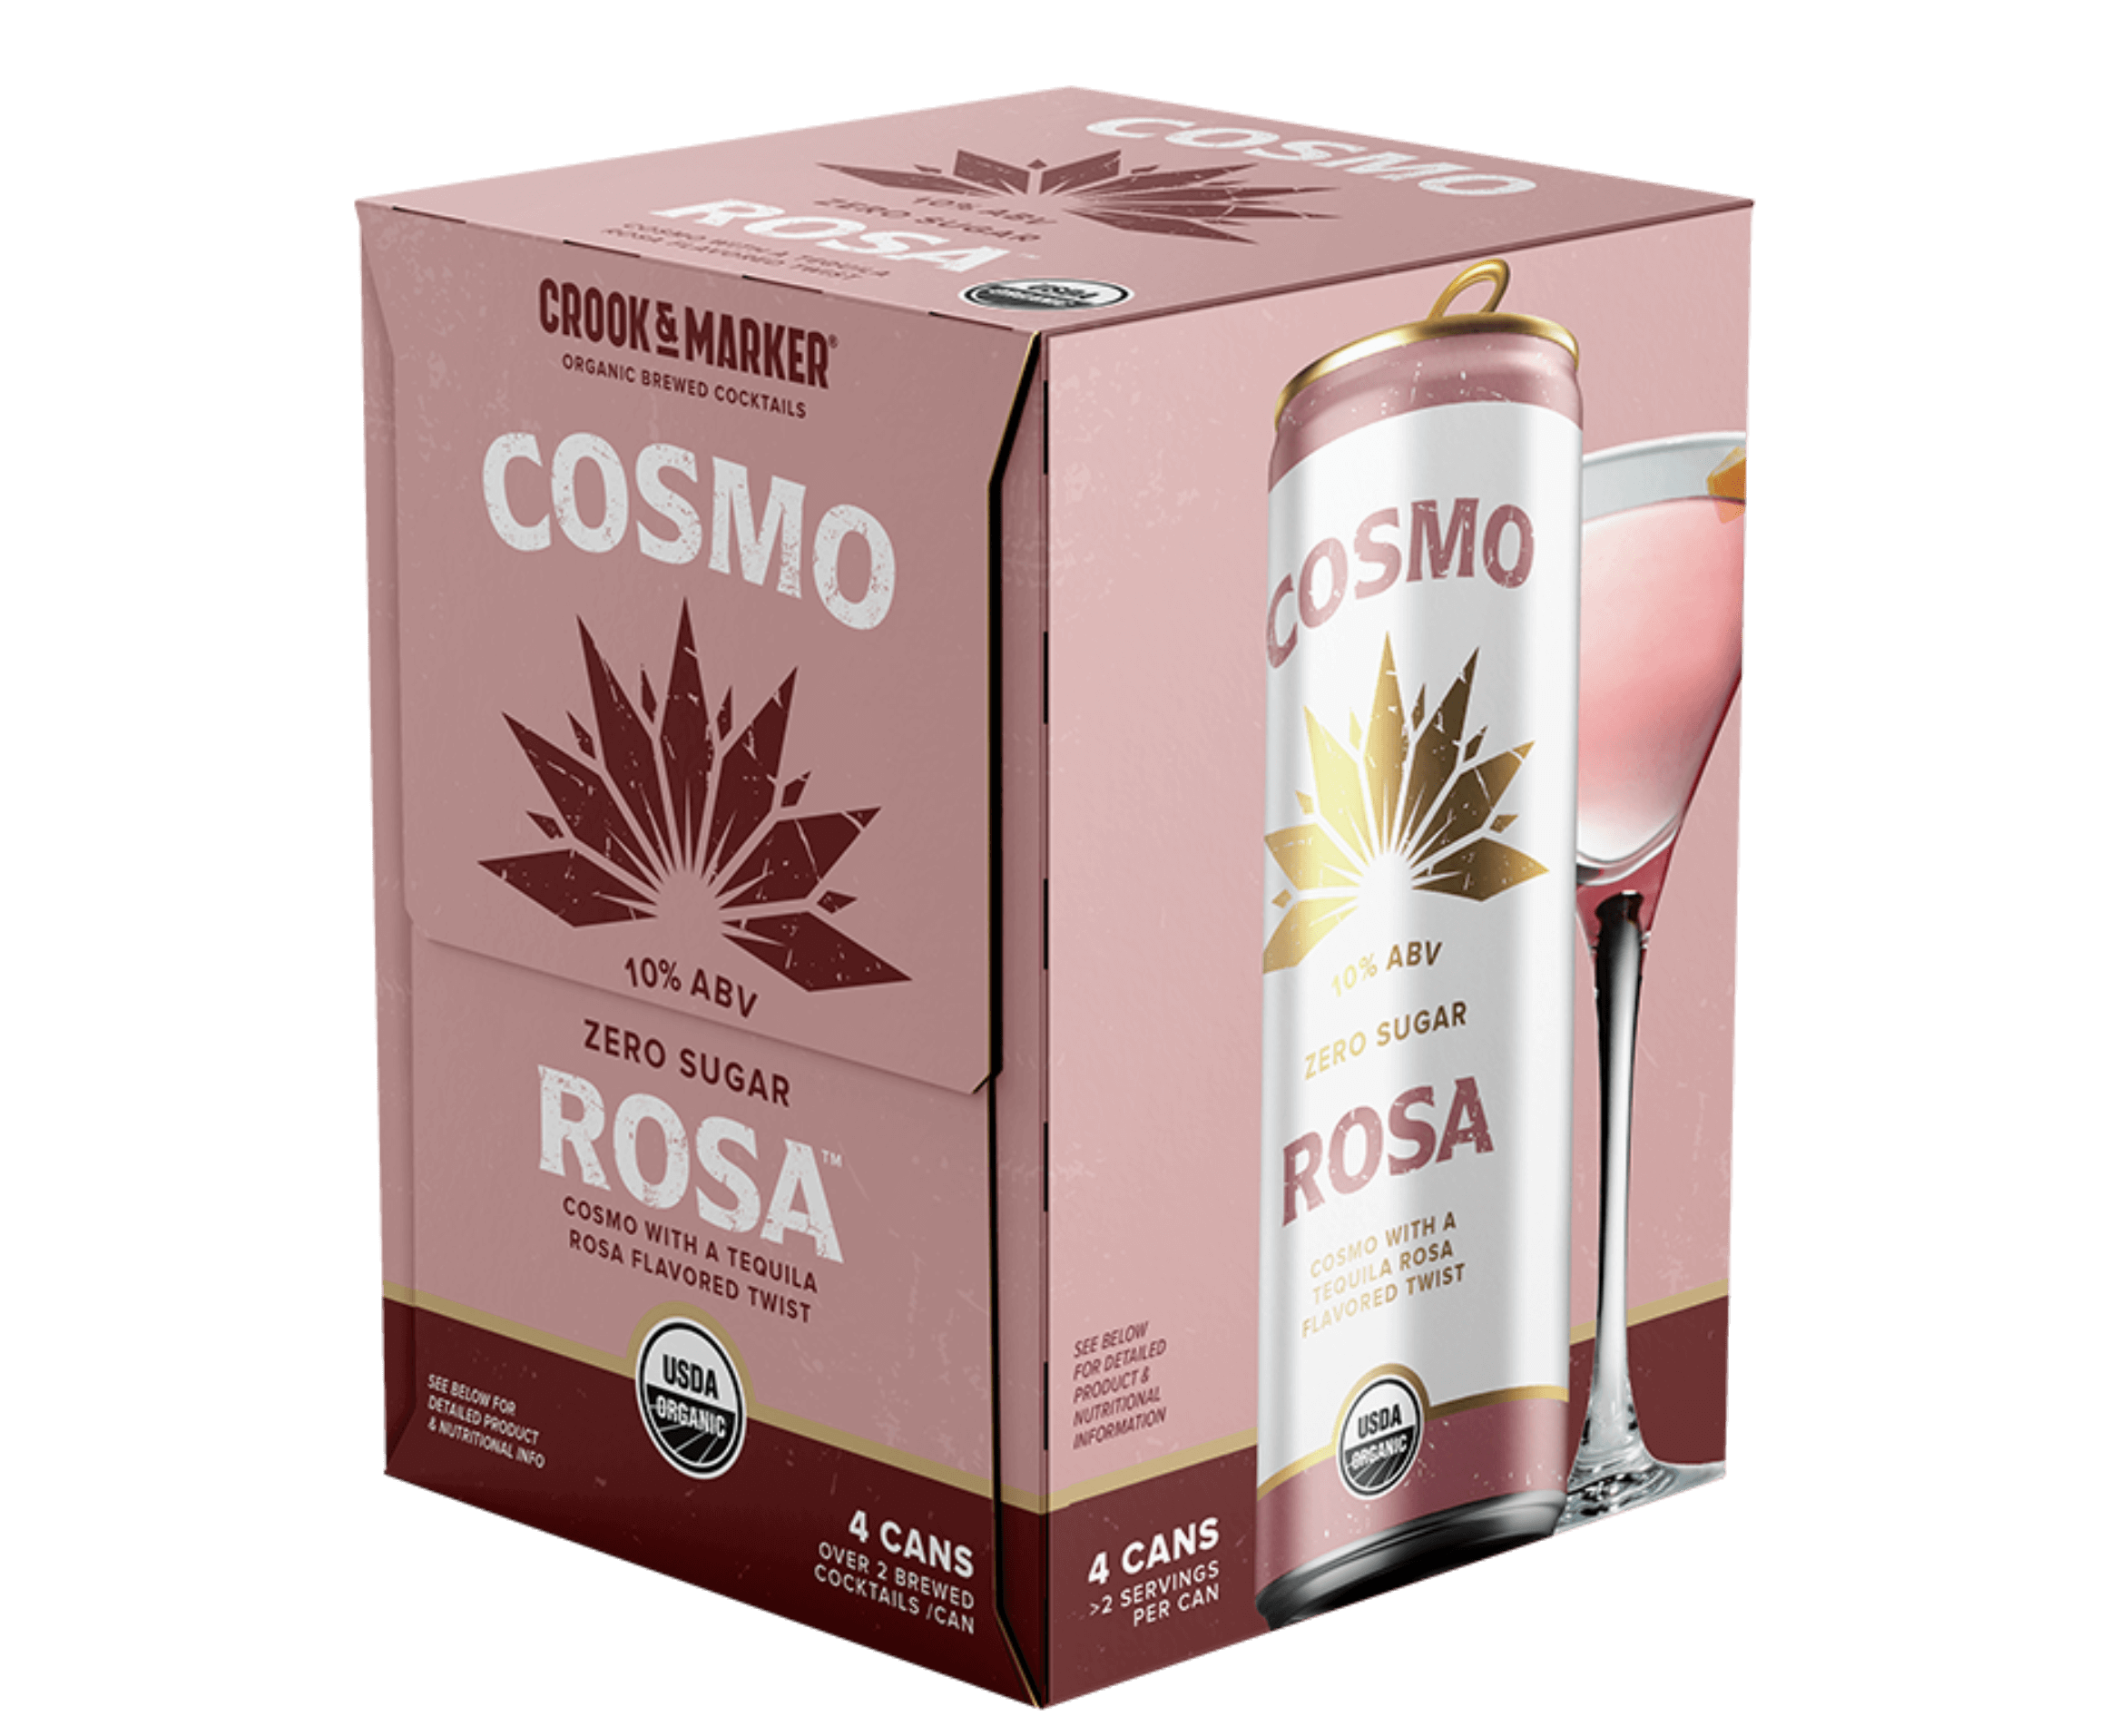 Crook & Marker Cosmo 4 Pack Box